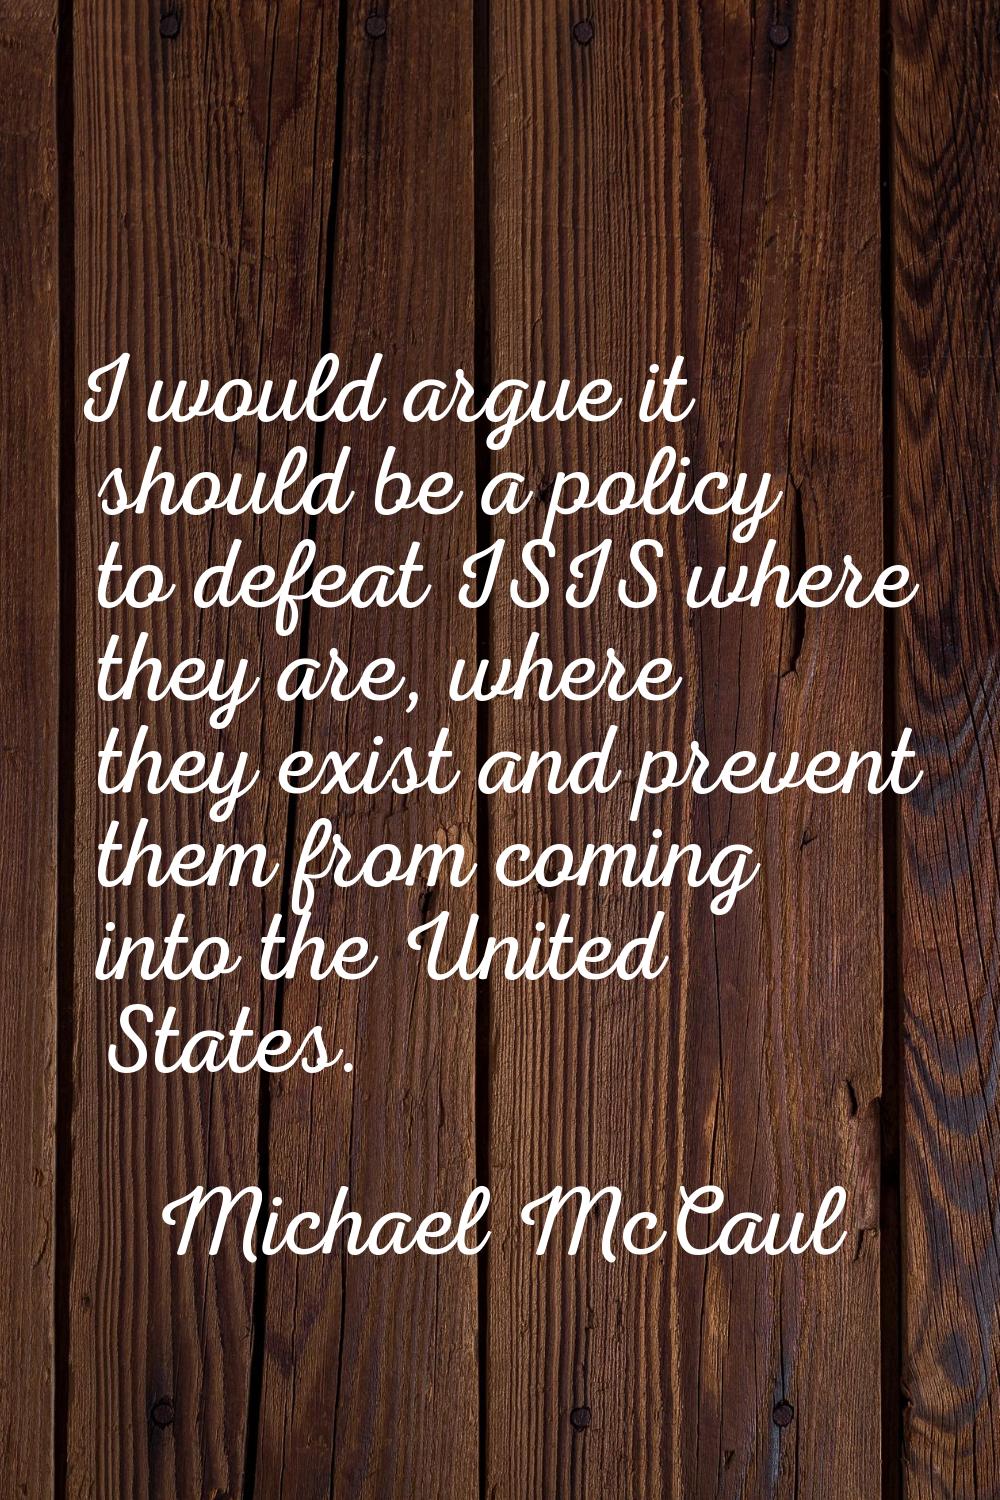 I would argue it should be a policy to defeat ISIS where they are, where they exist and prevent the